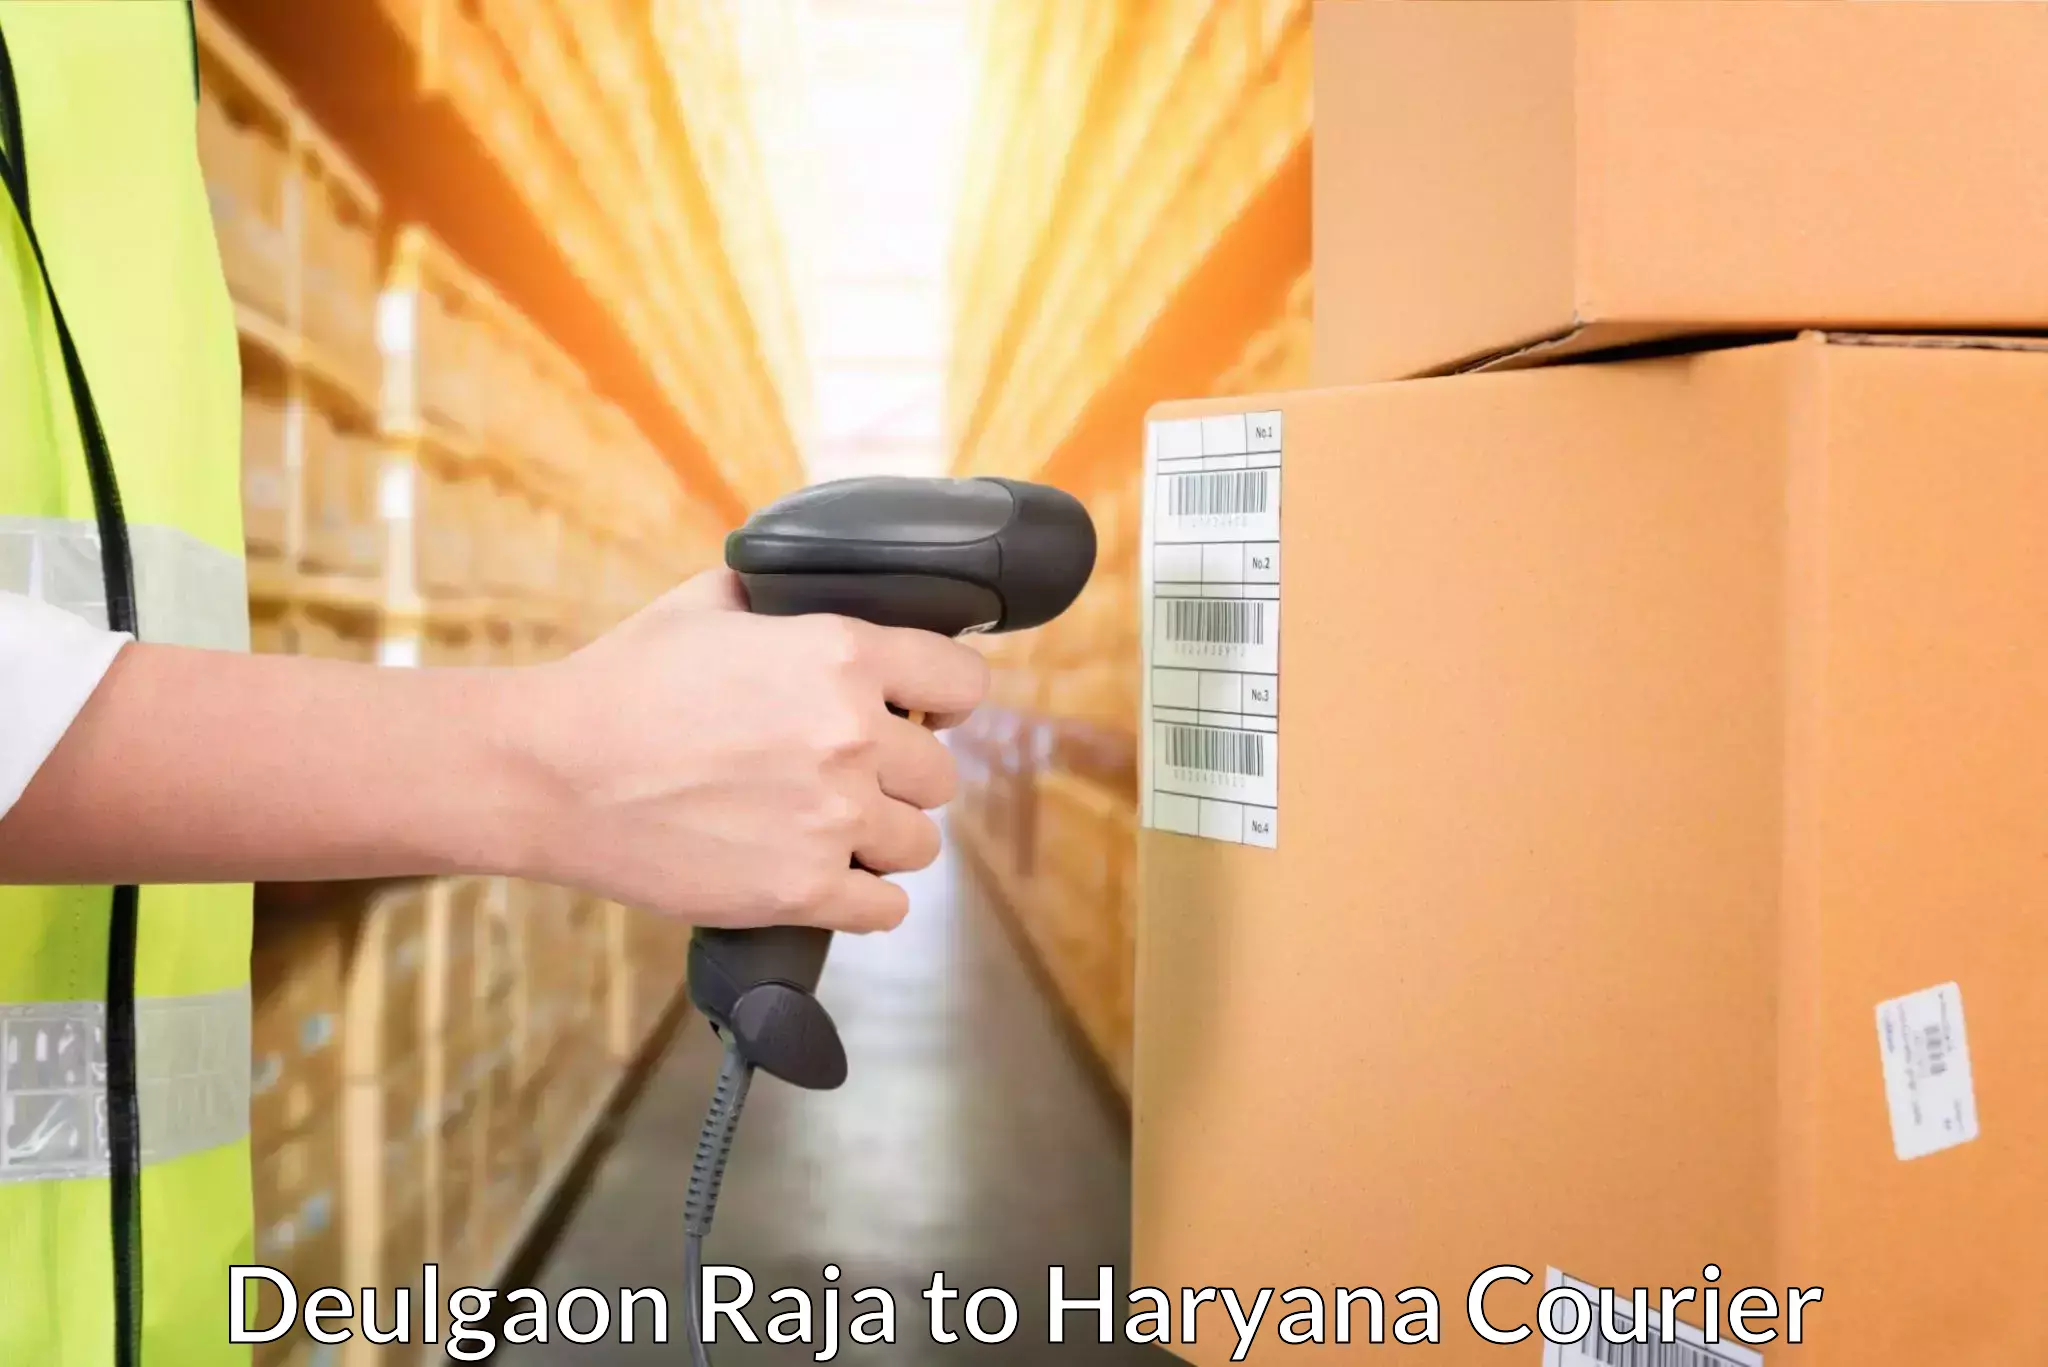 Express delivery solutions Deulgaon Raja to Gurgaon